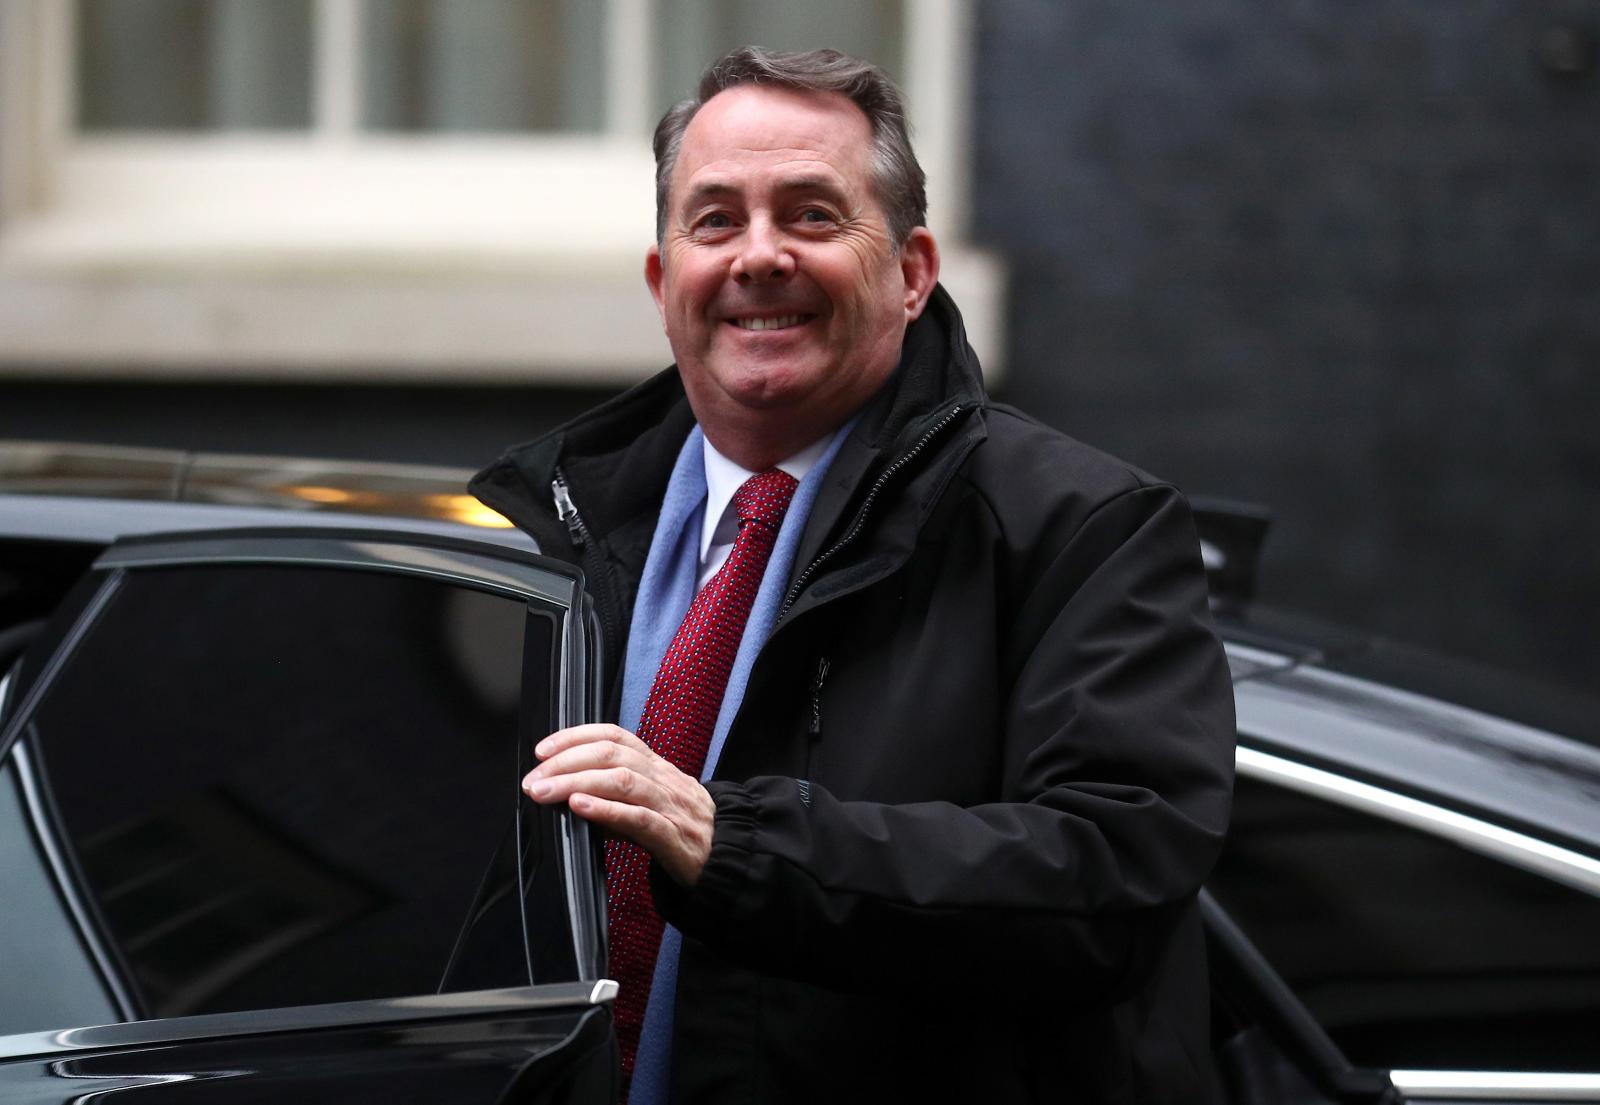 Liam Fox says '50-50' chance Brexit may be stopped: paper